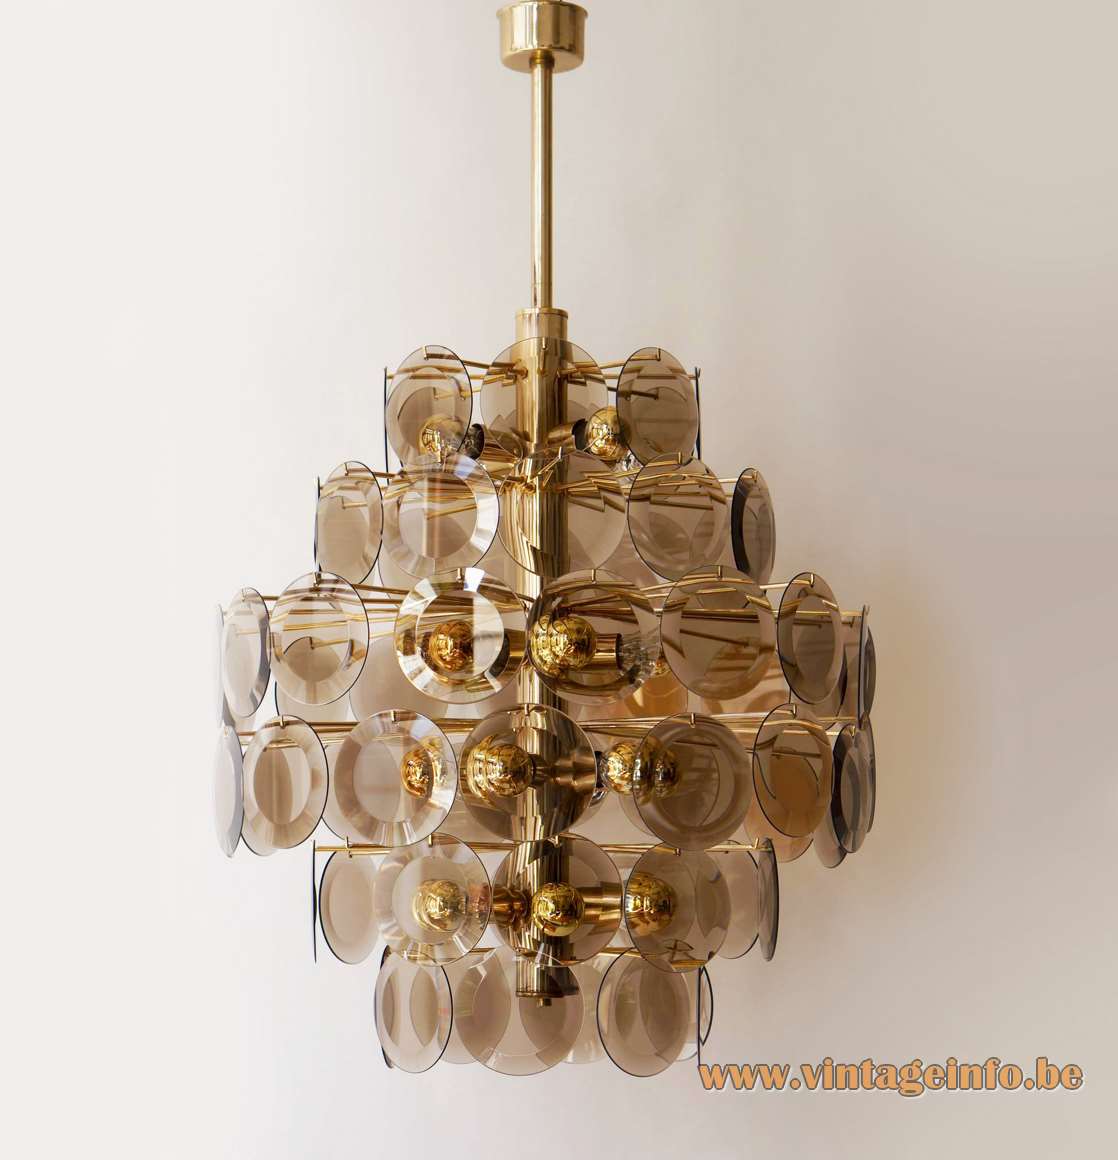 1970s smoked cut glass discs chandelier 71 dishes facet-cut brass wire frame rod ORION Austria 1980s